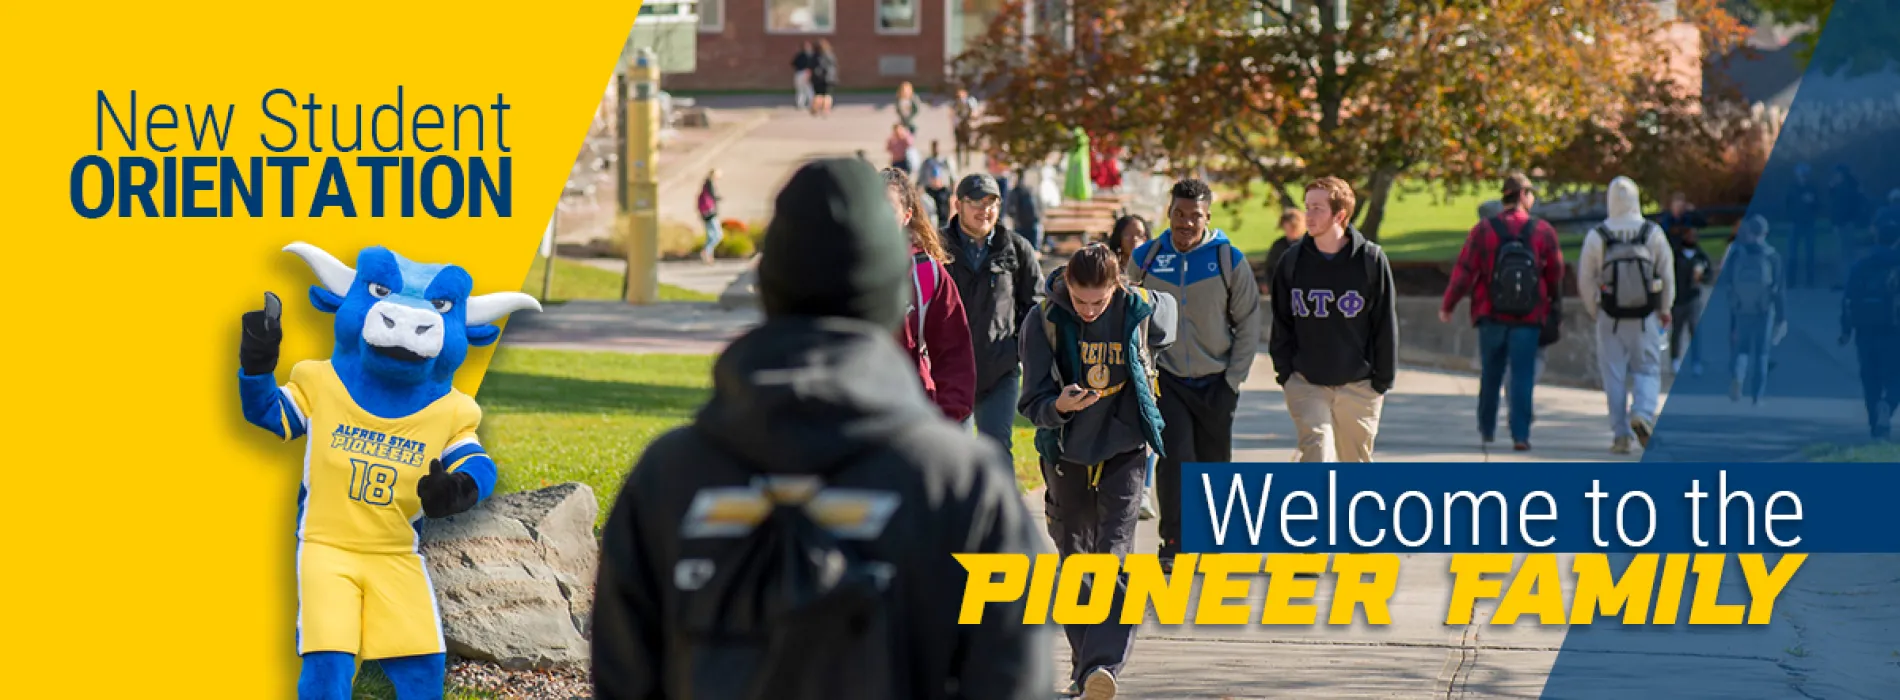 Welcome to the Pioneer Family! Image of ox mascot and students on campus sidewalk.